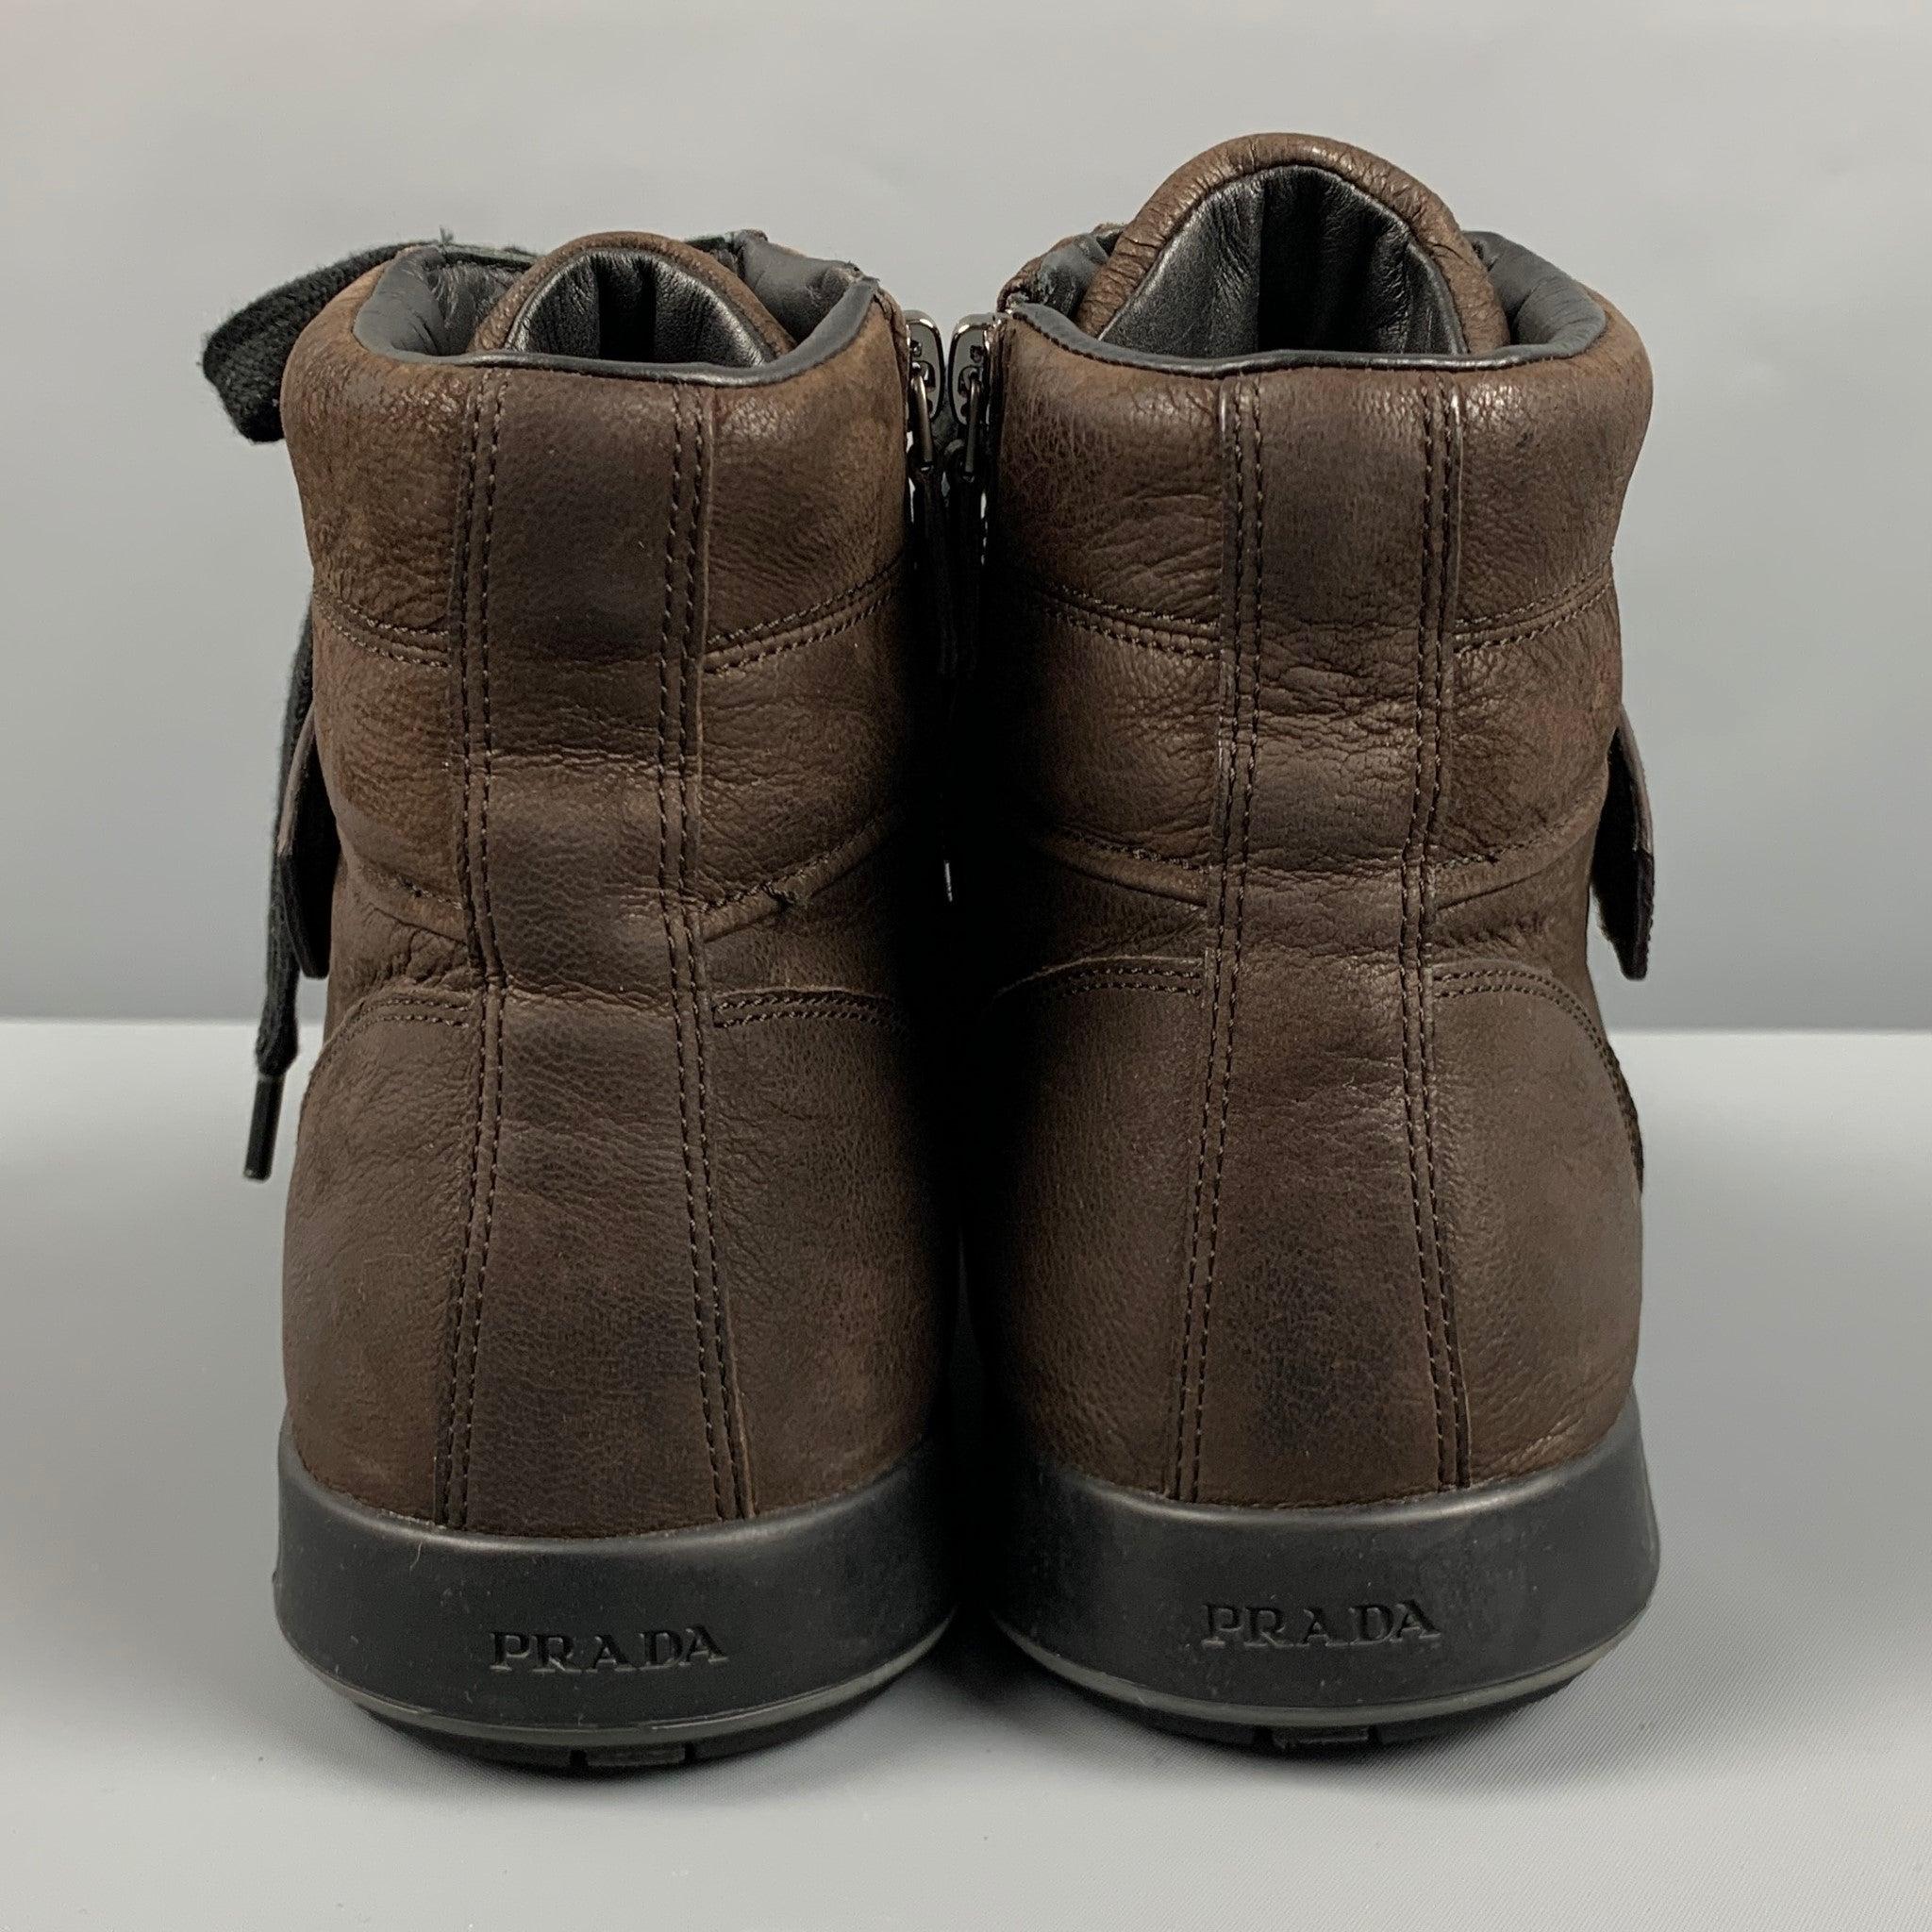 PRADA Size 11 Brown High Top Sneakers In Good Condition For Sale In San Francisco, CA